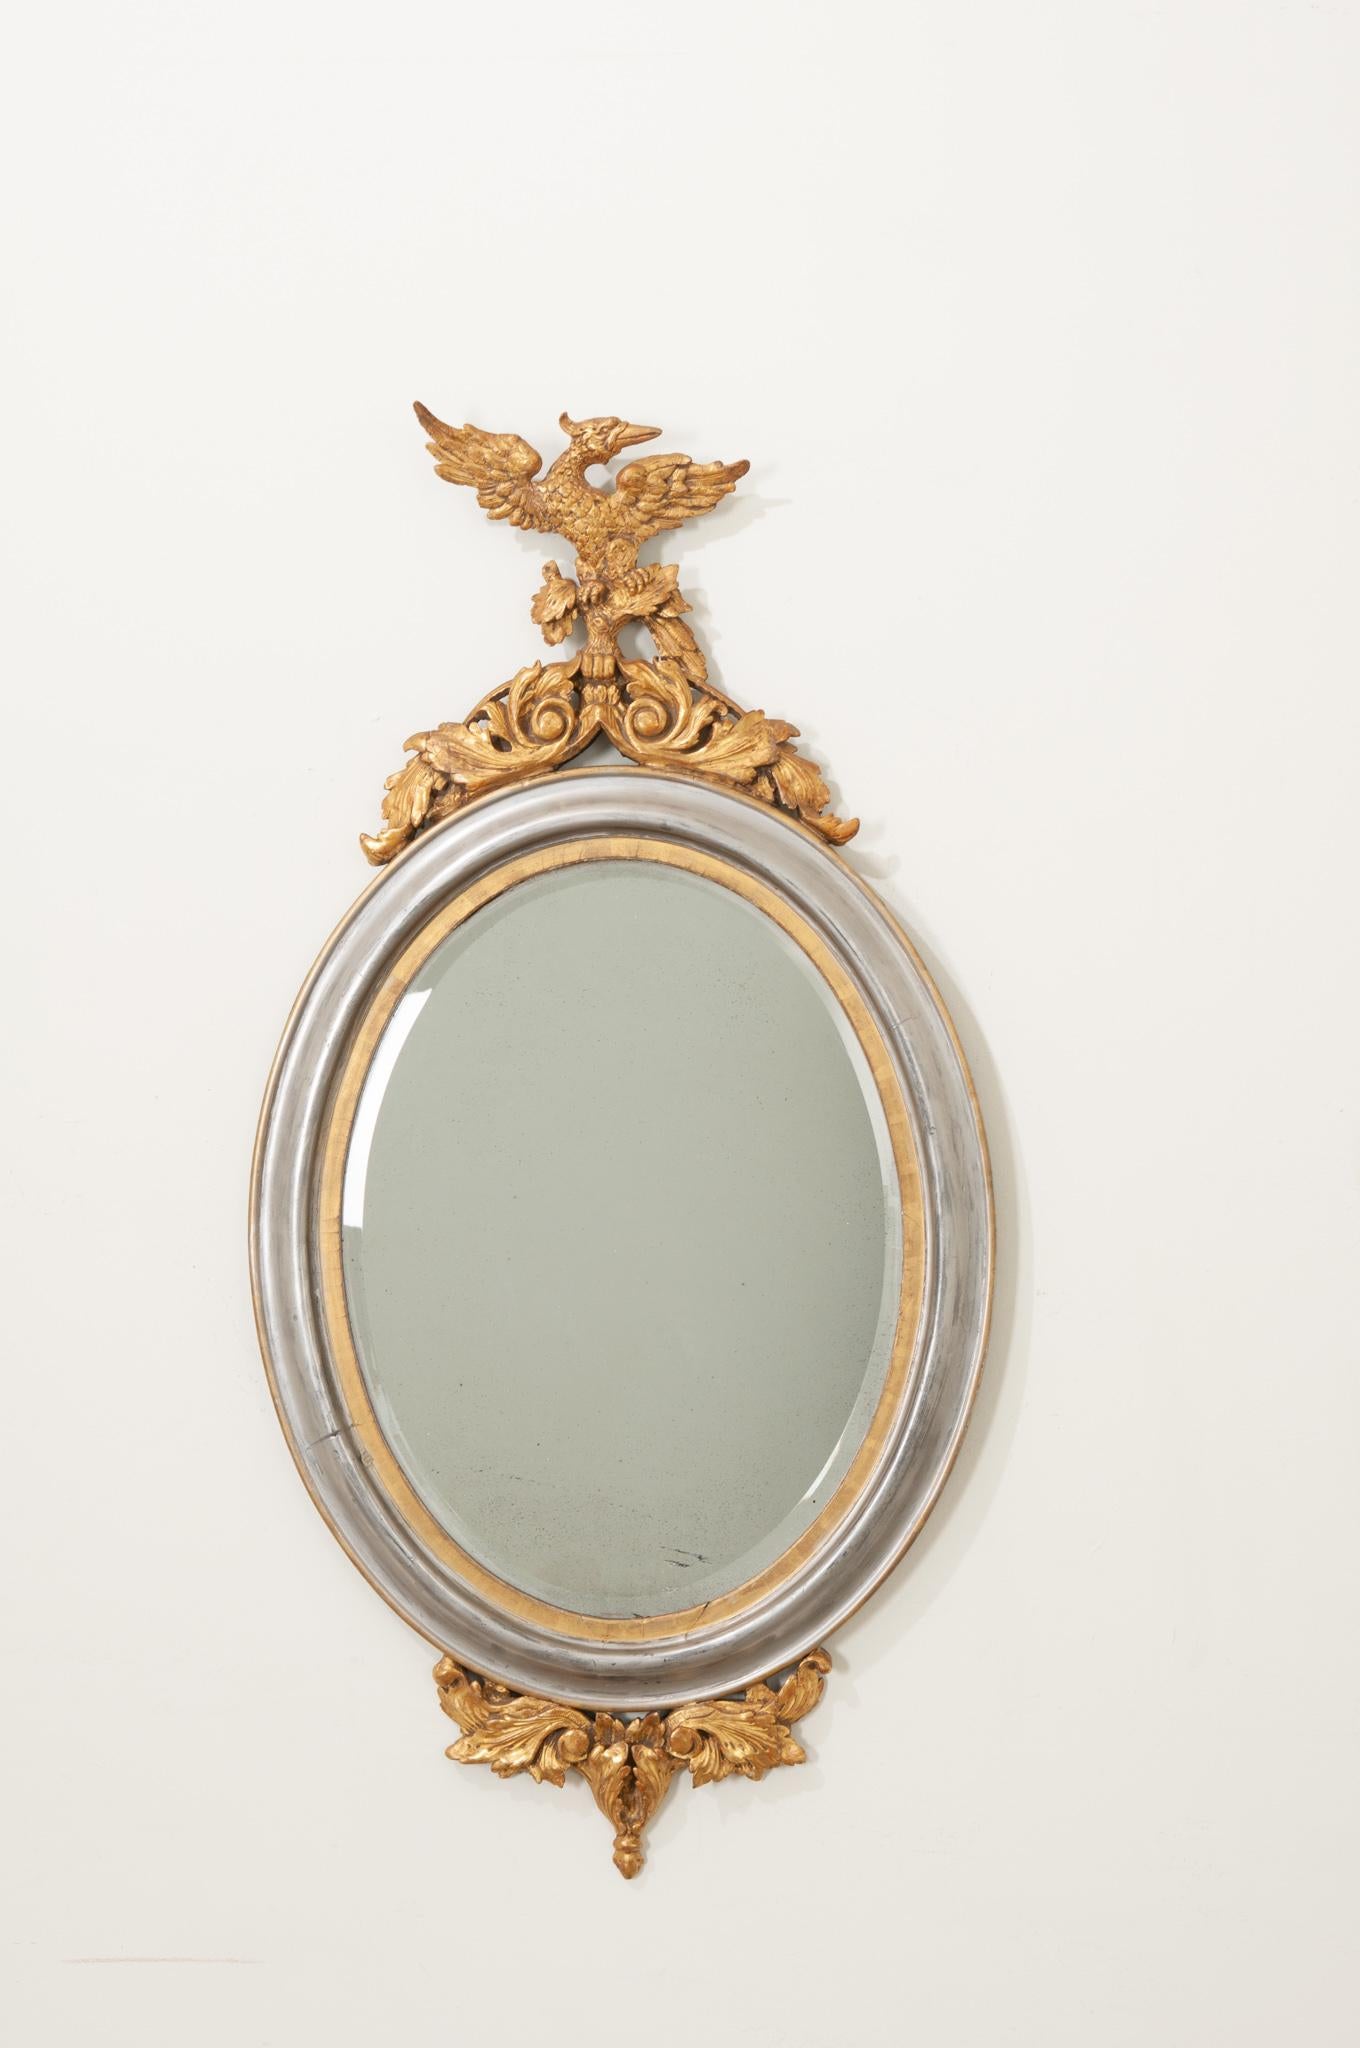 A regal gold and silver gilt mirror with intricate, carved details at the top and bottom. A splendid set of Ho ho birds top scrolling acanthus leaves on the crown of an elegant oval frame that terminates in a snake emerging from acanthus supports.